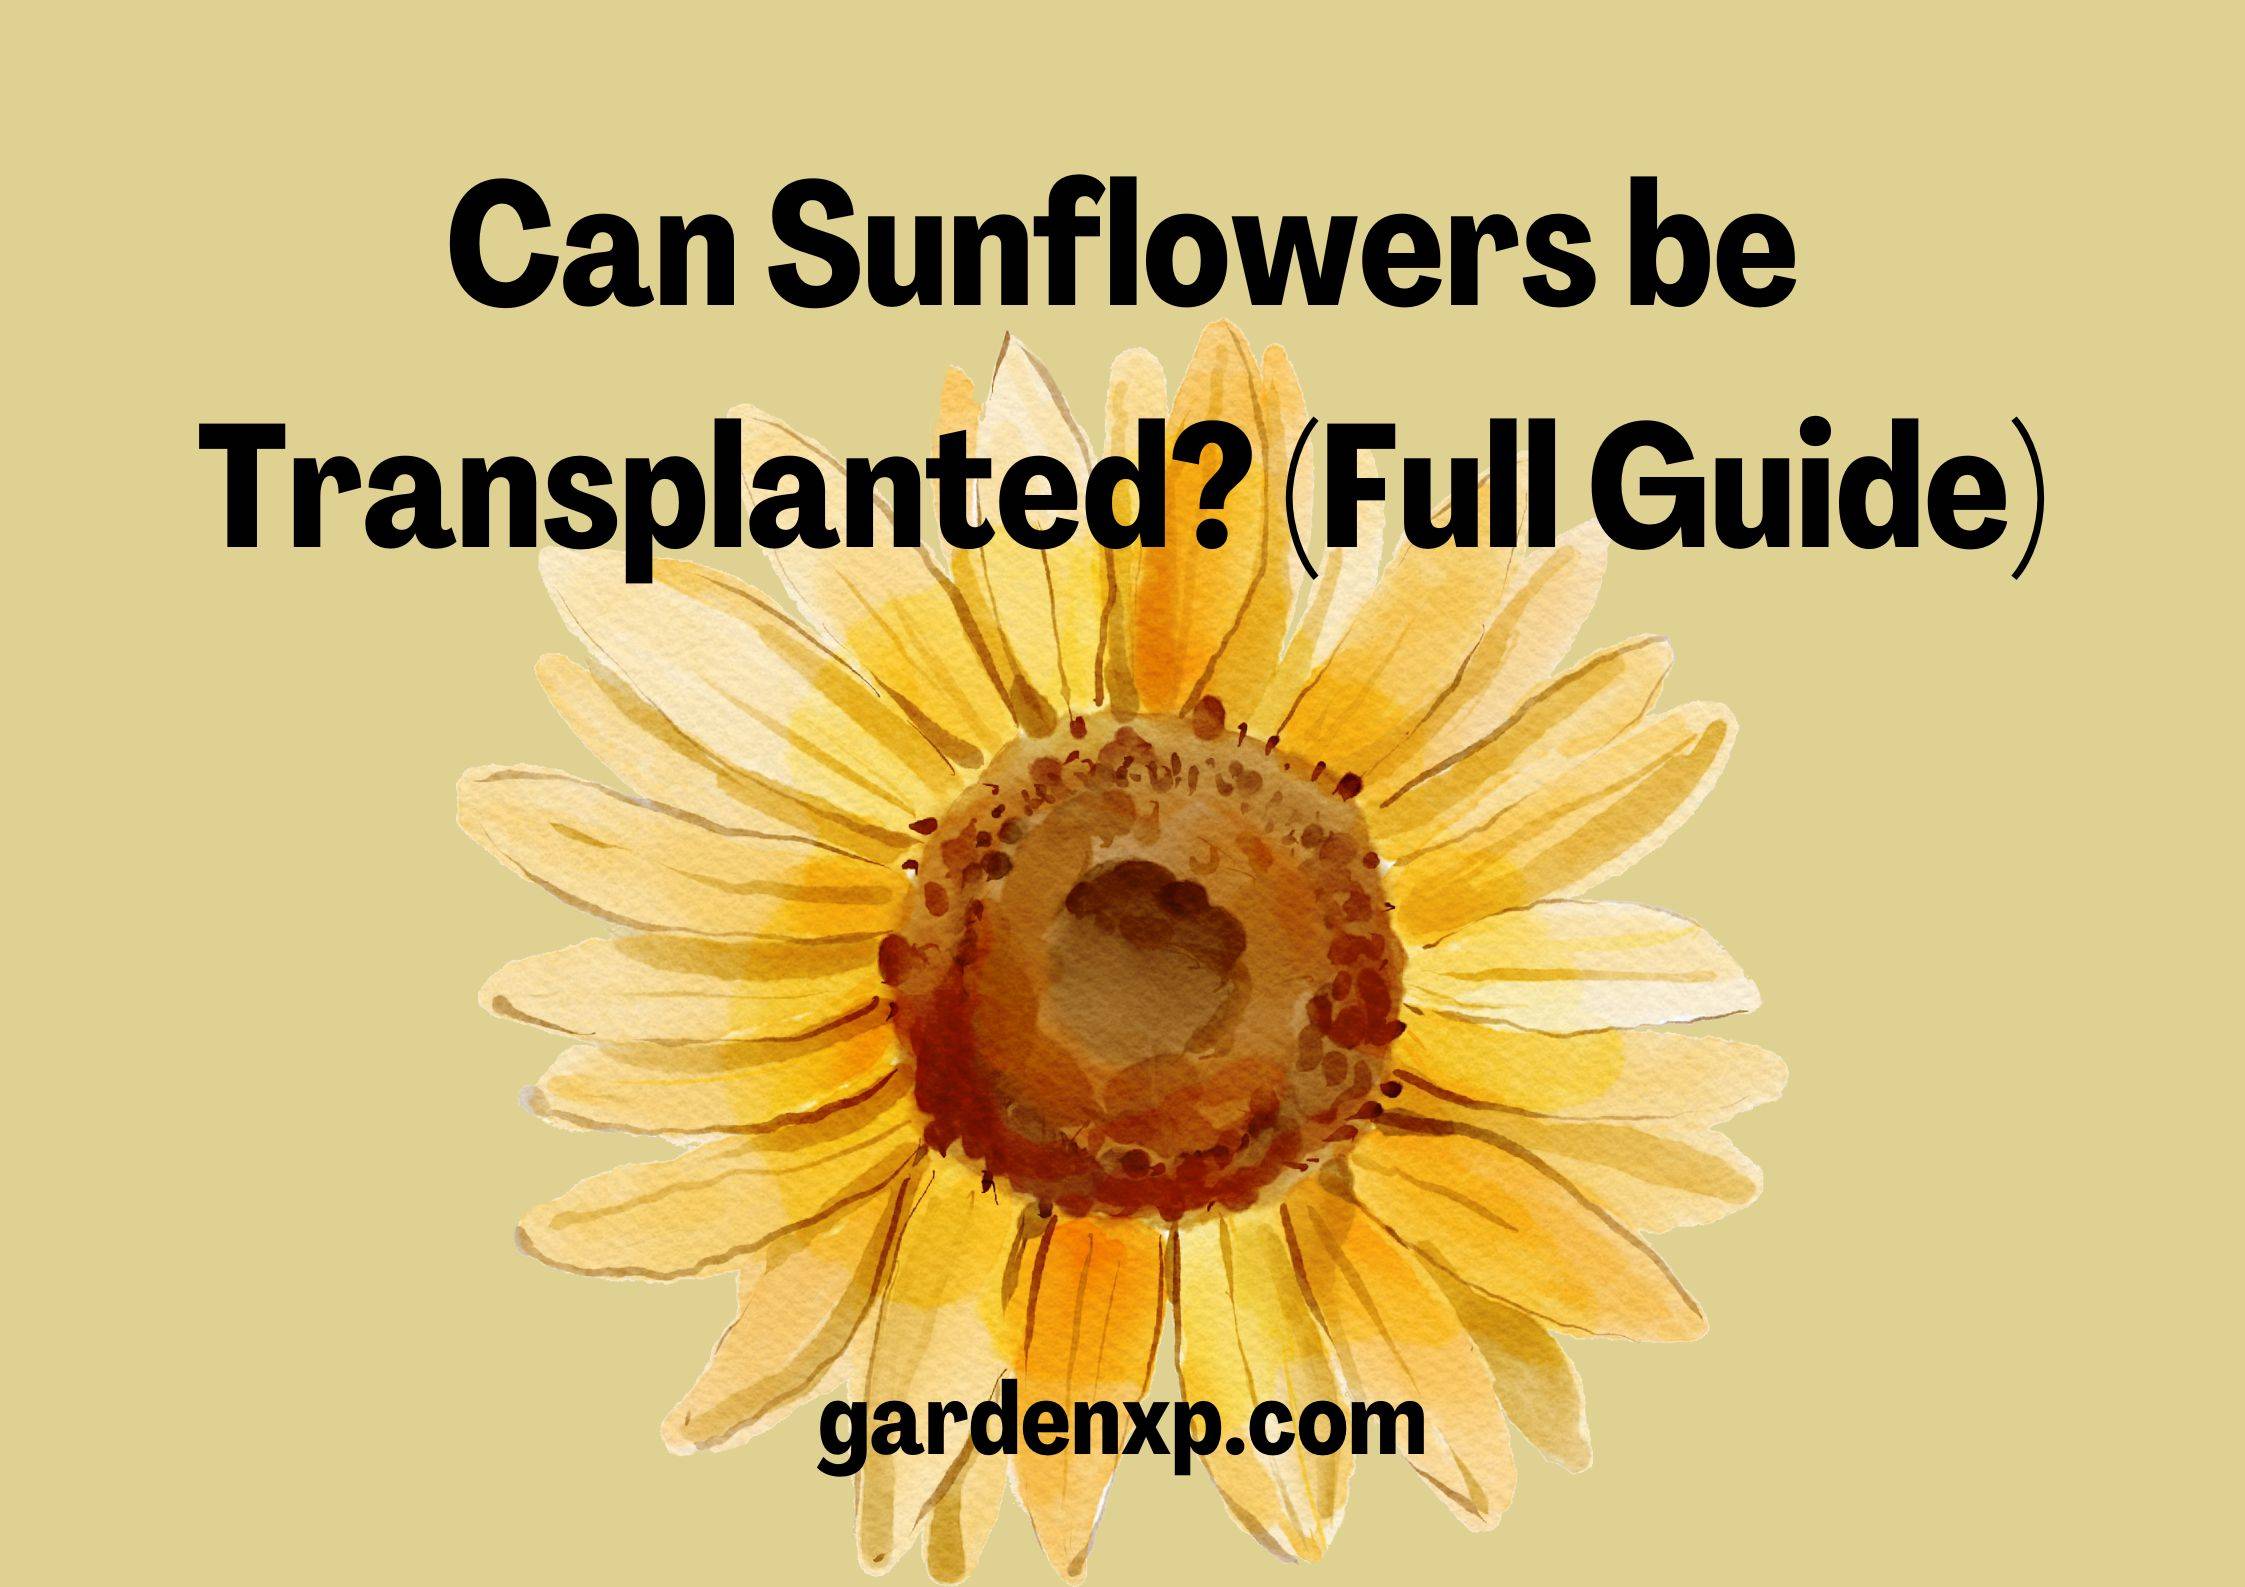 Can Sunflowers be Transplanted? (Full Guide)